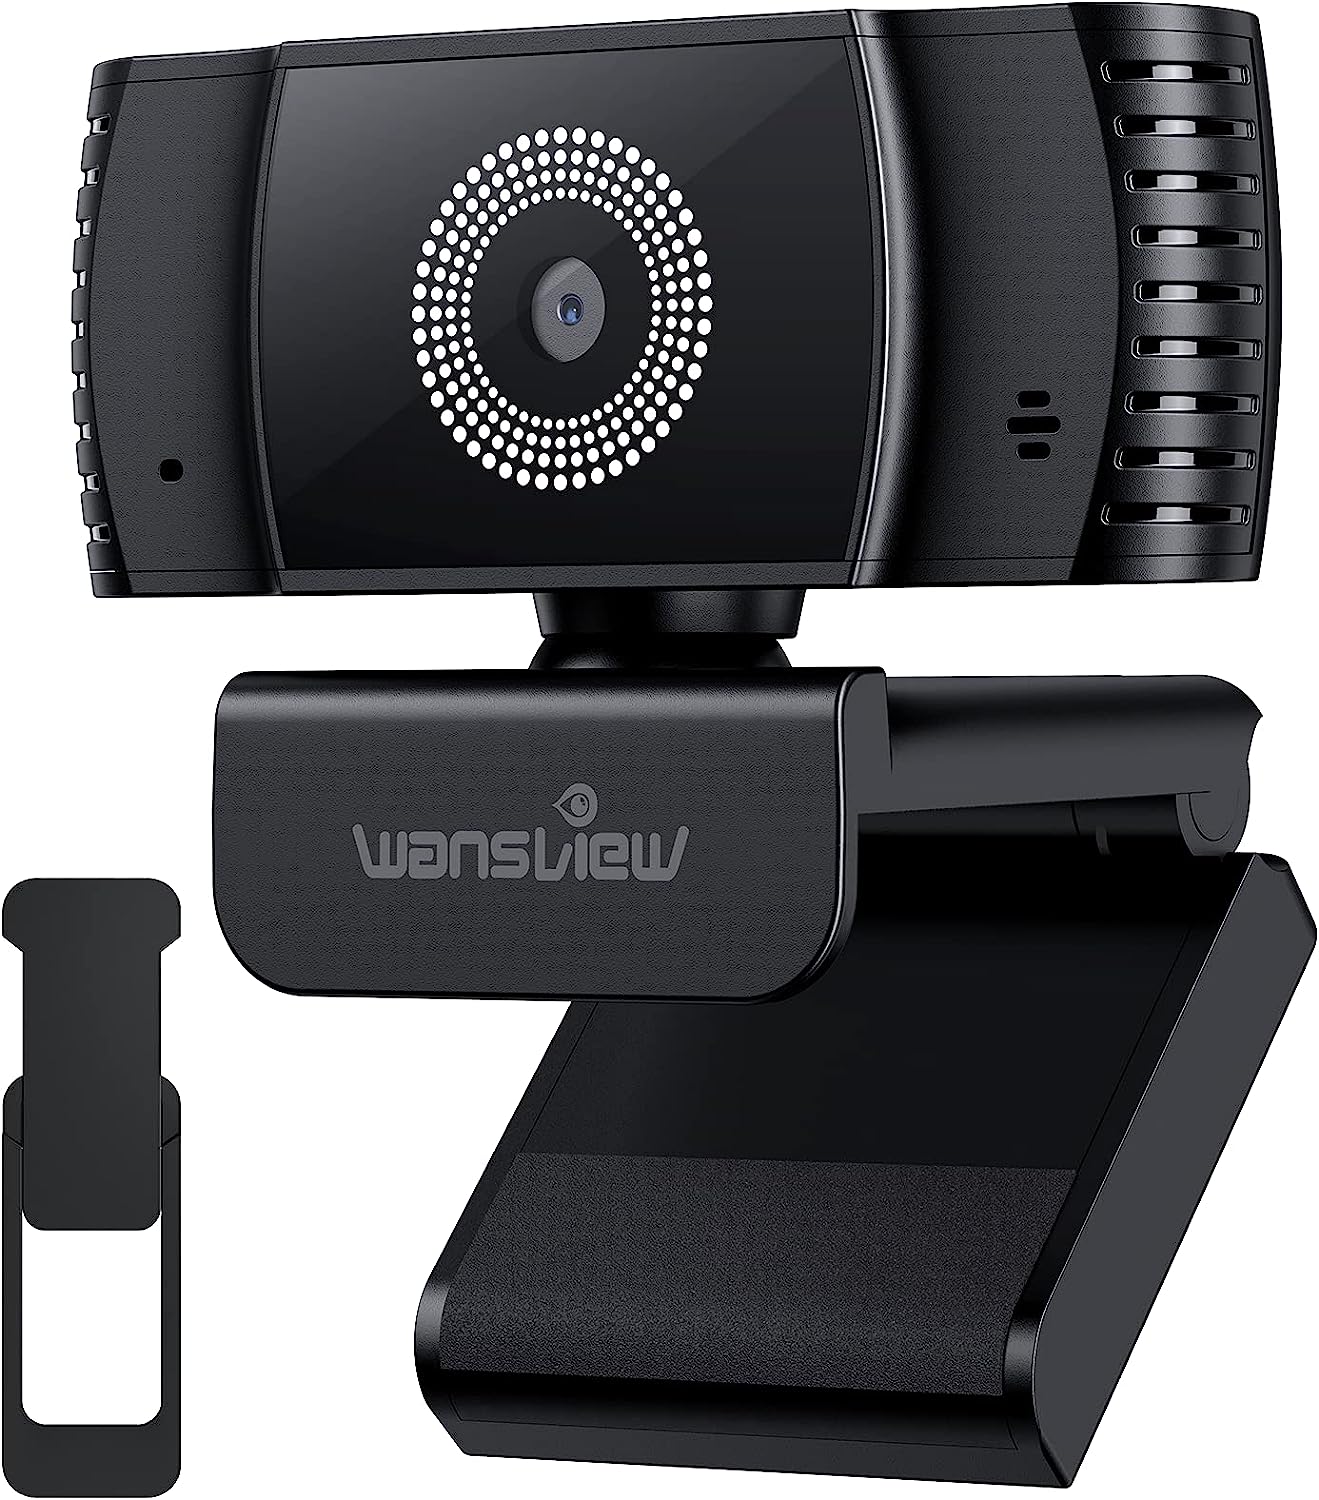 wansview Webcam with Microphone, 1080P HD Webcam USB [...]